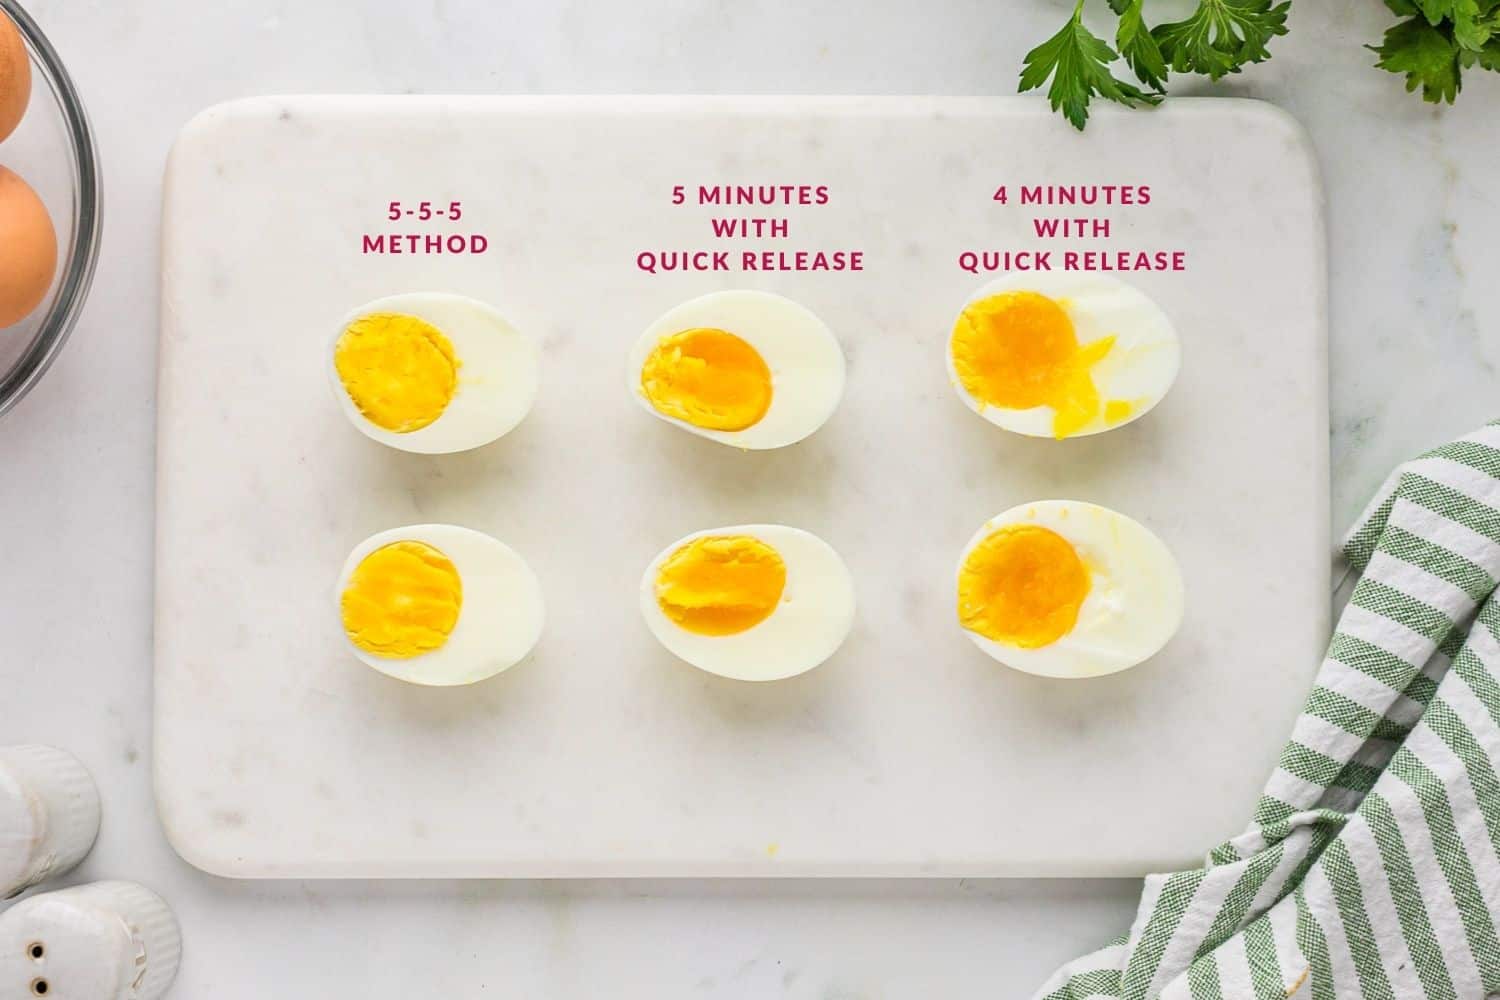 3 eggs cut in half to show yolks with different cooking times.